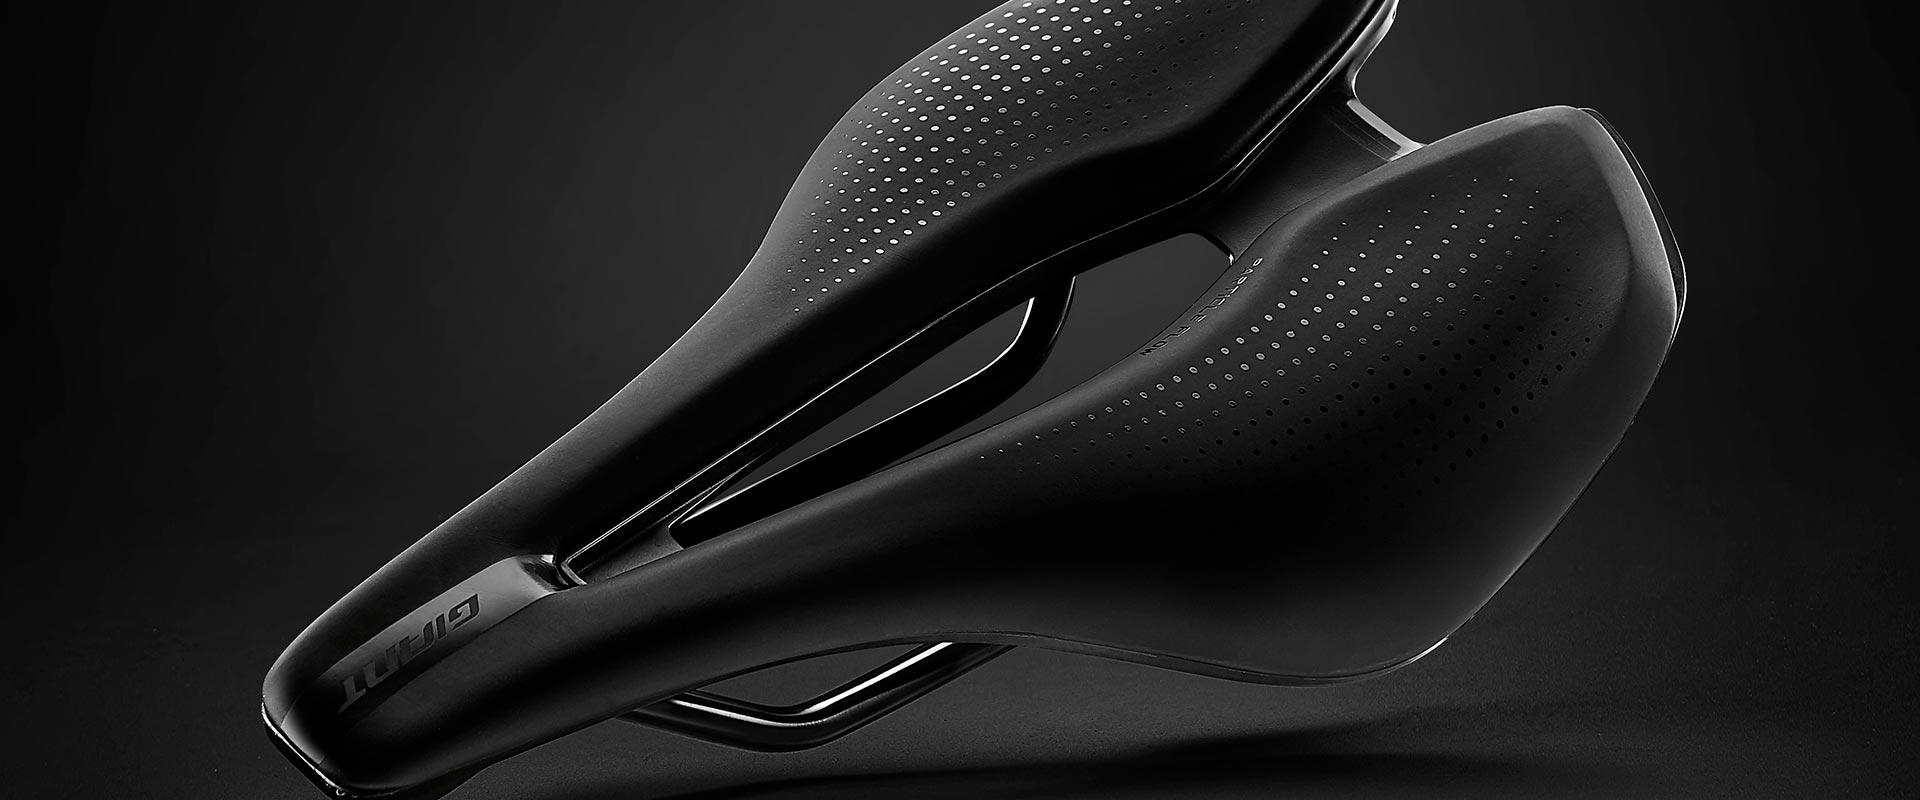 Fleet SL Saddle | Giant Bicycles Official site